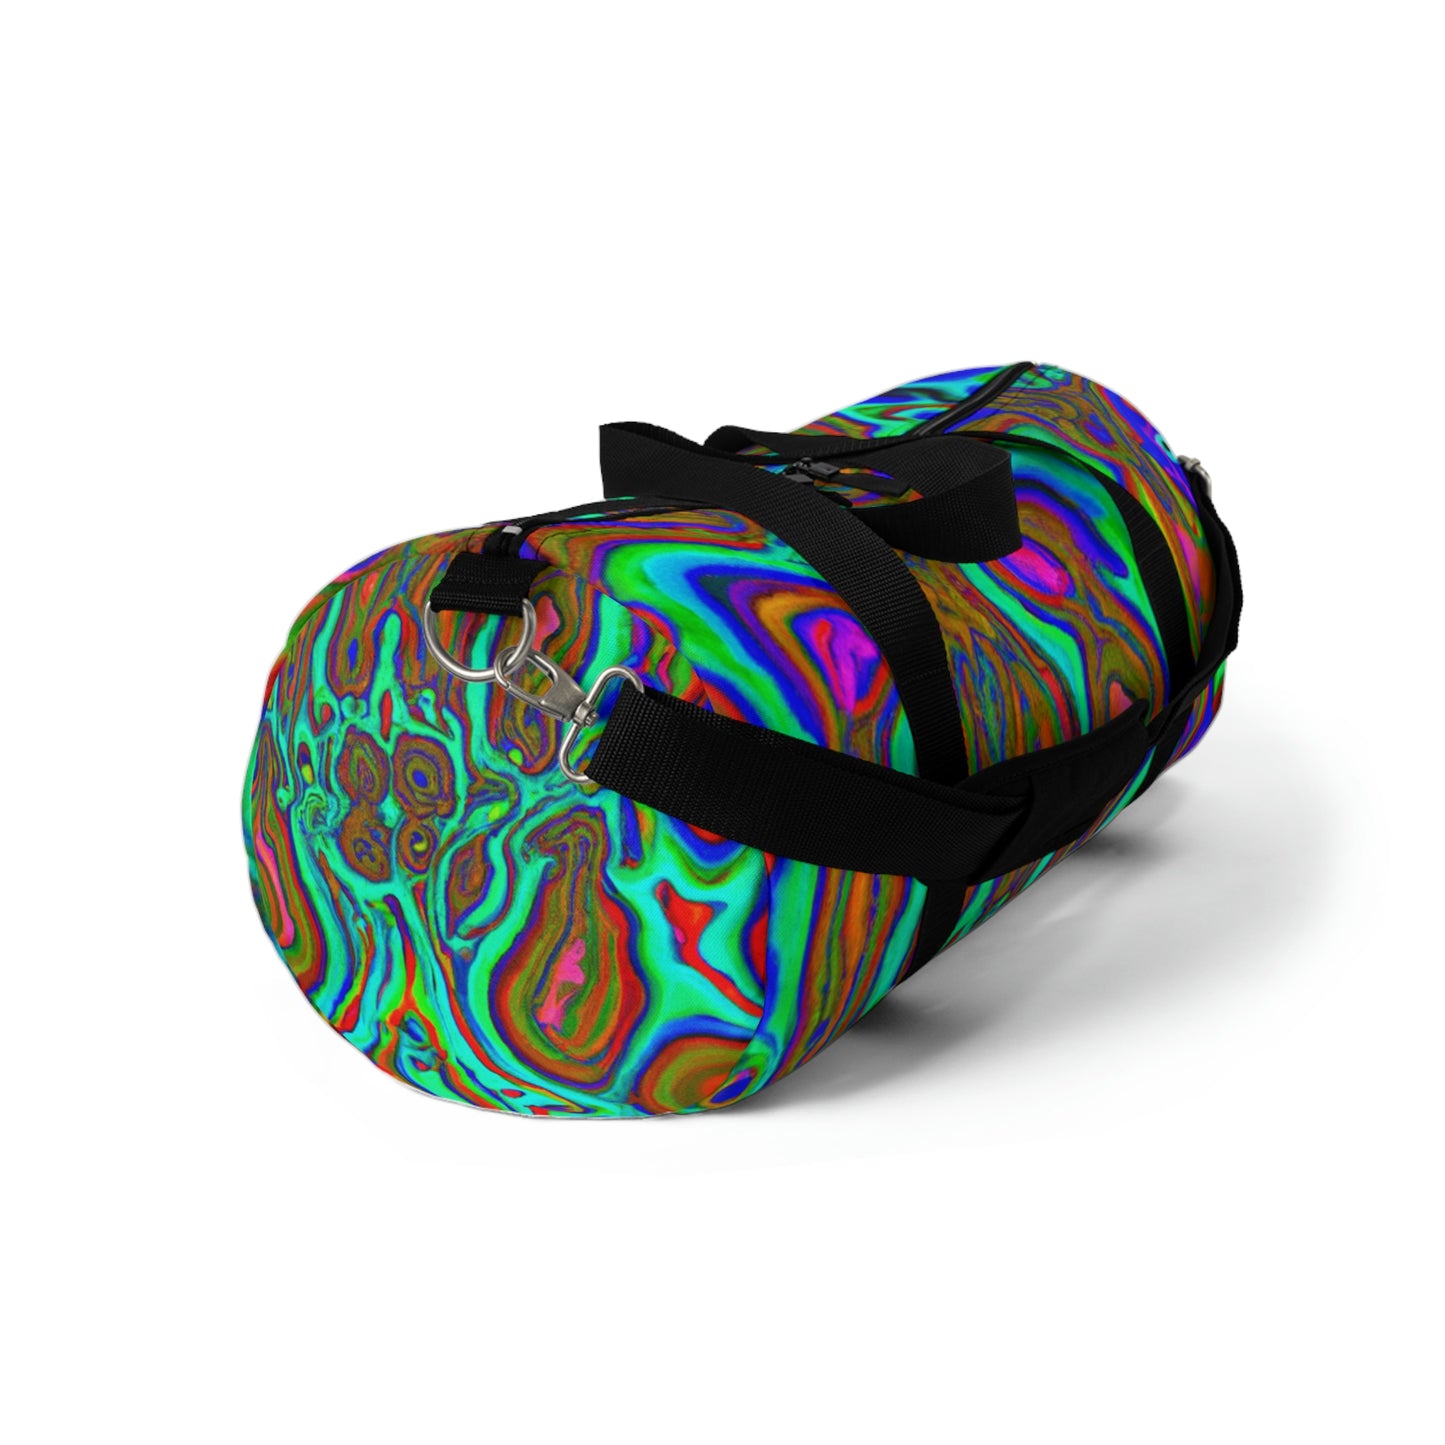 Dubois Couture - Psychedelic Duffel Bag